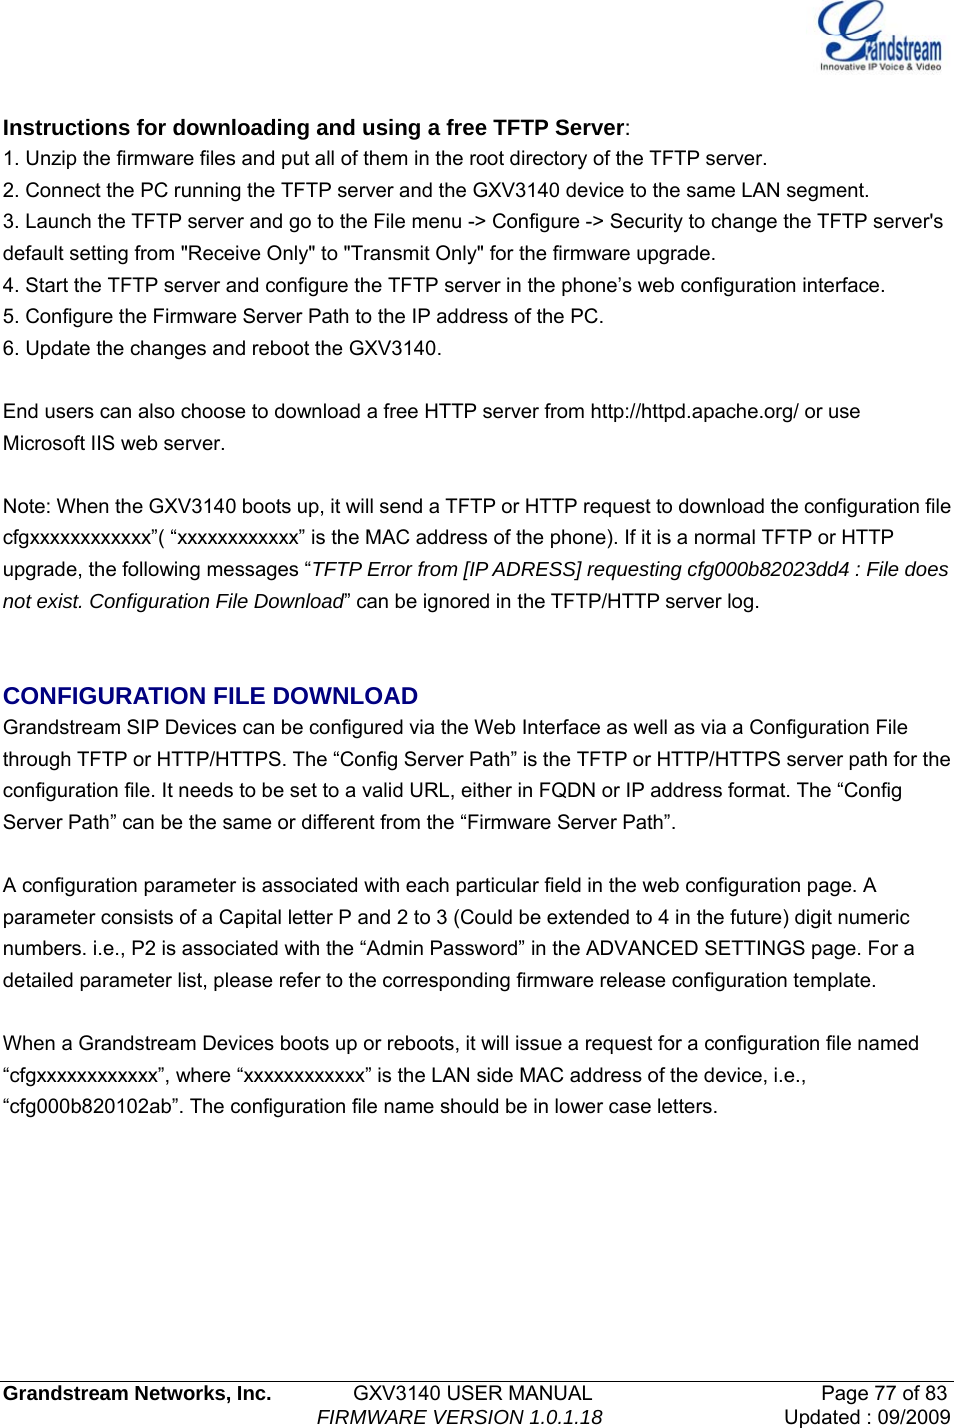   Grandstream Networks, Inc.        GXV3140 USER MANUAL                       Page 77 of 83                                FIRMWARE VERSION 1.0.1.18 Updated : 09/2009   Instructions for downloading and using a free TFTP Server: 1. Unzip the firmware files and put all of them in the root directory of the TFTP server. 2. Connect the PC running the TFTP server and the GXV3140 device to the same LAN segment. 3. Launch the TFTP server and go to the File menu -&gt; Configure -&gt; Security to change the TFTP server&apos;s default setting from &quot;Receive Only&quot; to &quot;Transmit Only&quot; for the firmware upgrade. 4. Start the TFTP server and configure the TFTP server in the phone’s web configuration interface. 5. Configure the Firmware Server Path to the IP address of the PC. 6. Update the changes and reboot the GXV3140.  End users can also choose to download a free HTTP server from http://httpd.apache.org/ or use Microsoft IIS web server.  Note: When the GXV3140 boots up, it will send a TFTP or HTTP request to download the configuration file   cfgxxxxxxxxxxxx”( “xxxxxxxxxxxx” is the MAC address of the phone). If it is a normal TFTP or HTTP upgrade, the following messages “TFTP Error from [IP ADRESS] requesting cfg000b82023dd4 : File does not exist. Configuration File Download” can be ignored in the TFTP/HTTP server log.   CONFIGURATION FILE DOWNLOAD Grandstream SIP Devices can be configured via the Web Interface as well as via a Configuration File through TFTP or HTTP/HTTPS. The “Config Server Path” is the TFTP or HTTP/HTTPS server path for the configuration file. It needs to be set to a valid URL, either in FQDN or IP address format. The “Config Server Path” can be the same or different from the “Firmware Server Path”.  A configuration parameter is associated with each particular field in the web configuration page. A parameter consists of a Capital letter P and 2 to 3 (Could be extended to 4 in the future) digit numeric numbers. i.e., P2 is associated with the “Admin Password” in the ADVANCED SETTINGS page. For a detailed parameter list, please refer to the corresponding firmware release configuration template.  When a Grandstream Devices boots up or reboots, it will issue a request for a configuration file named “cfgxxxxxxxxxxxx”, where “xxxxxxxxxxxx” is the LAN side MAC address of the device, i.e., “cfg000b820102ab”. The configuration file name should be in lower case letters.      